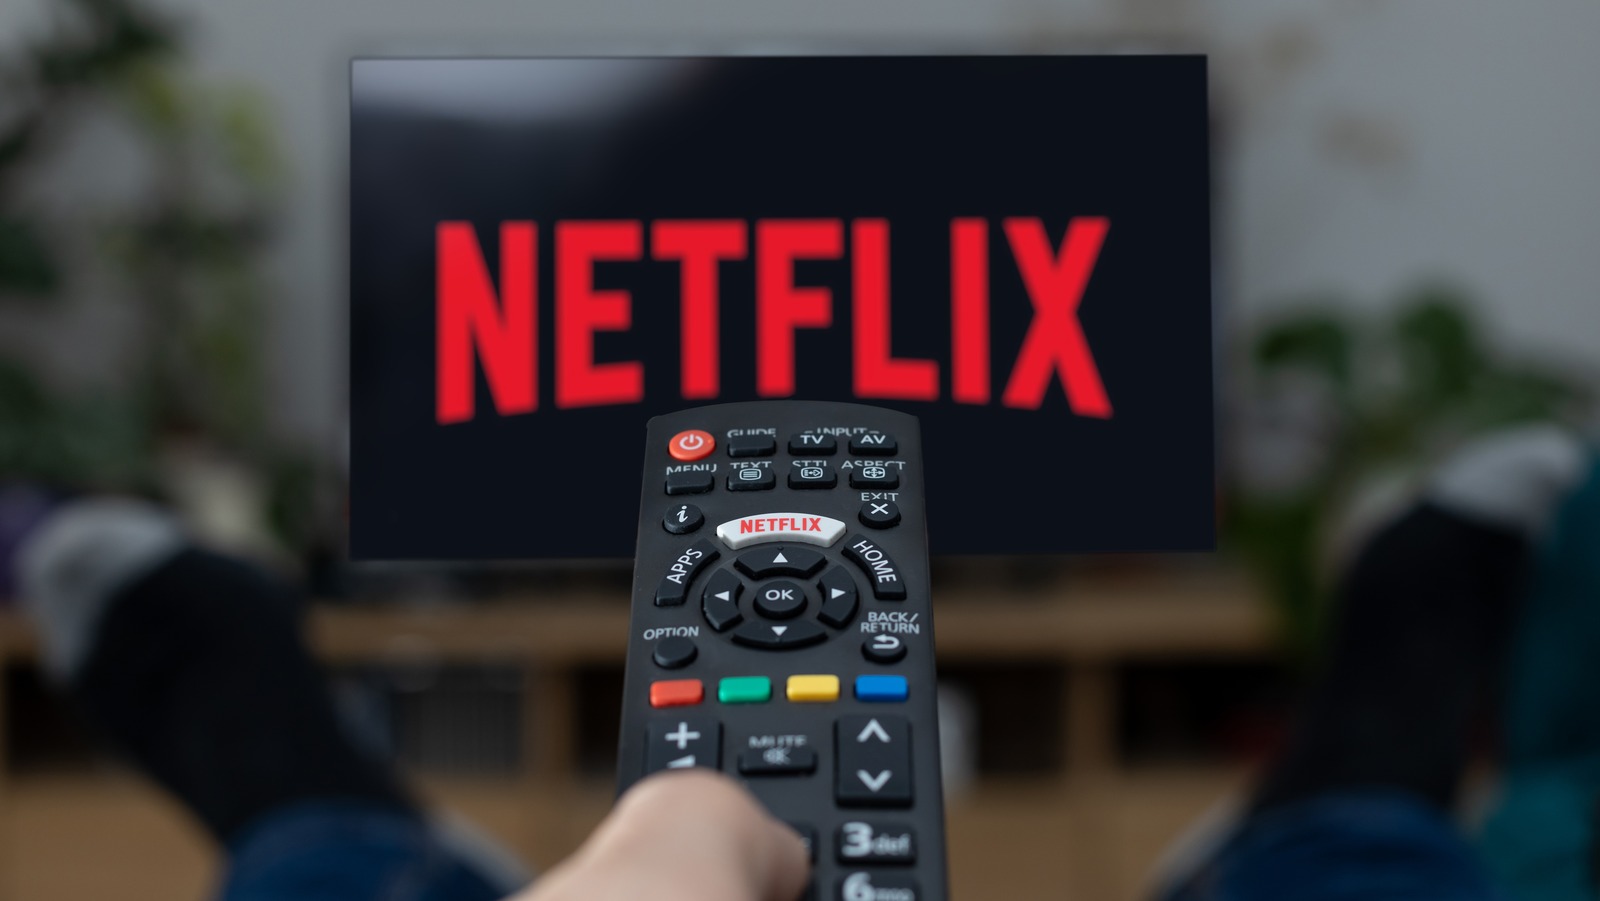 netflix-basic-with-ads-plan-pricing-launch-date-revealed